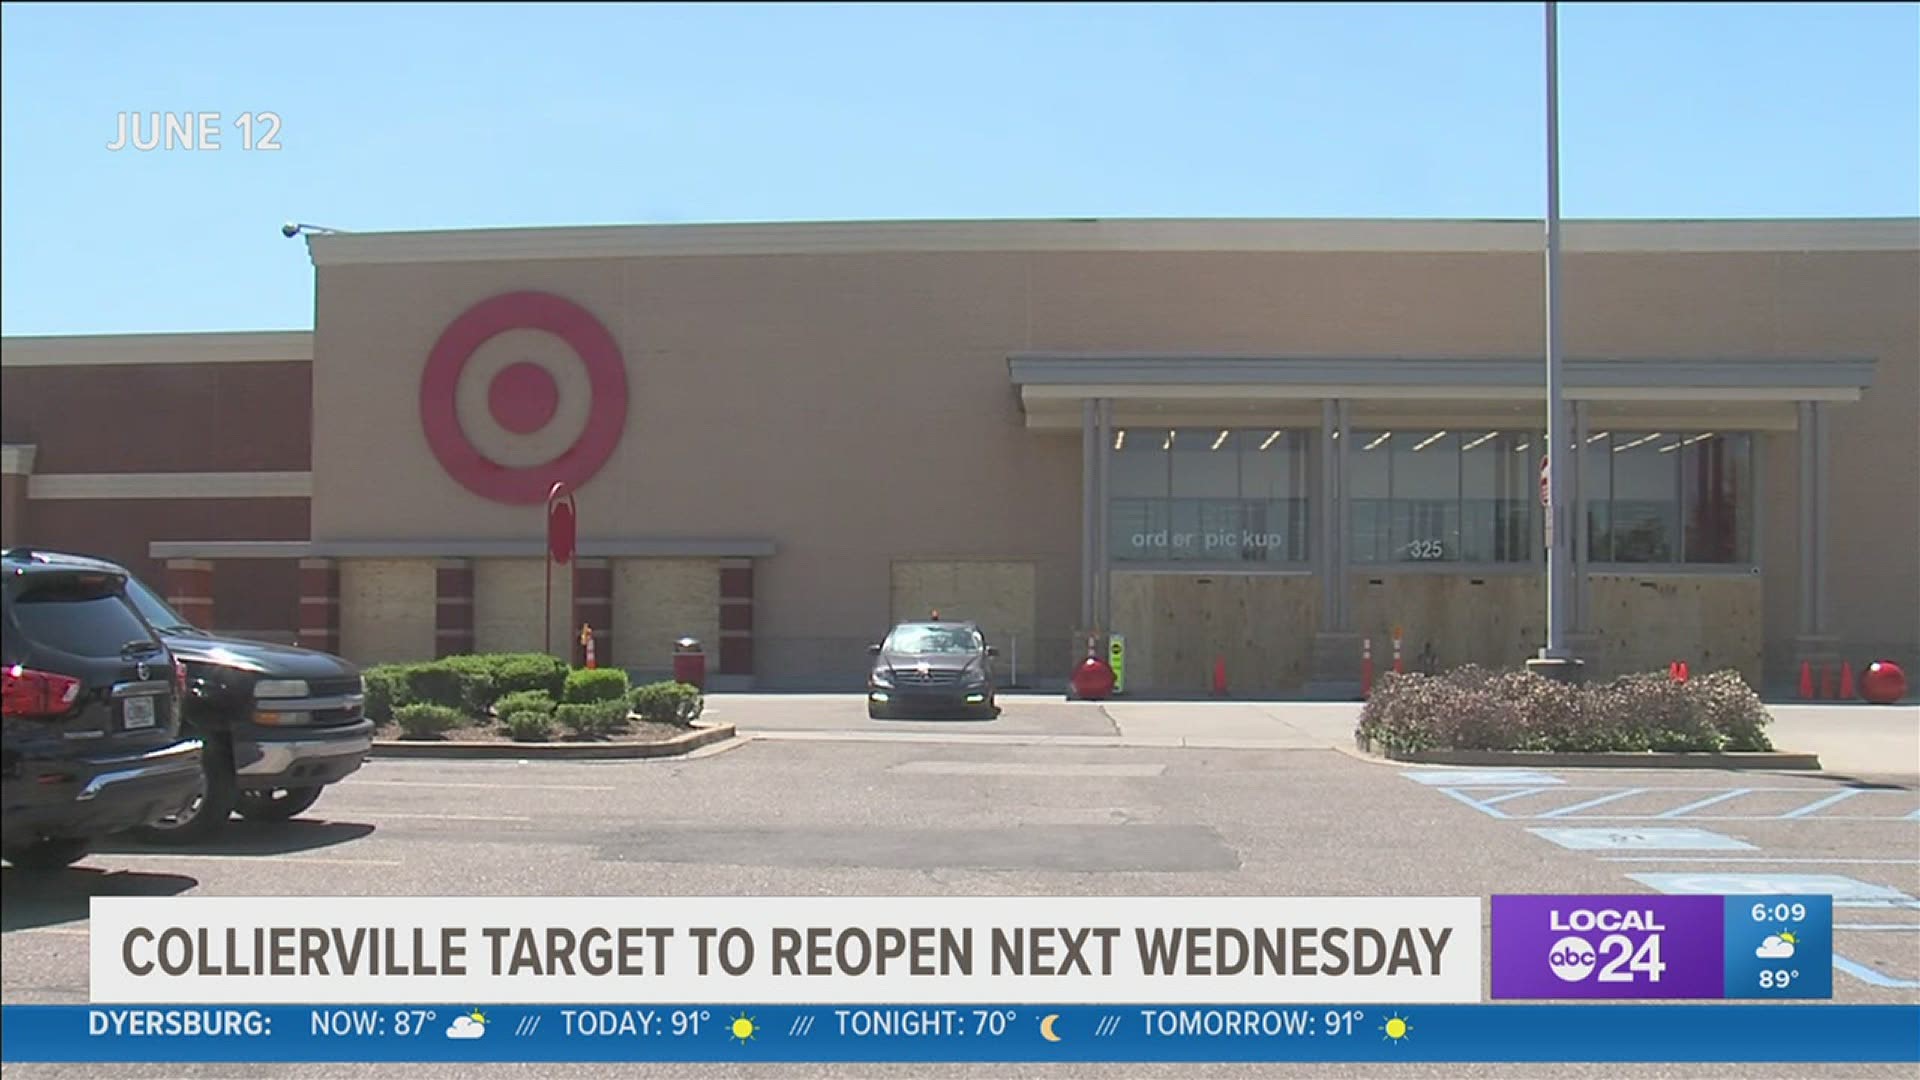 More than a month after a fire damaged the store, the Collierville Target will reopen its doors July 21st.